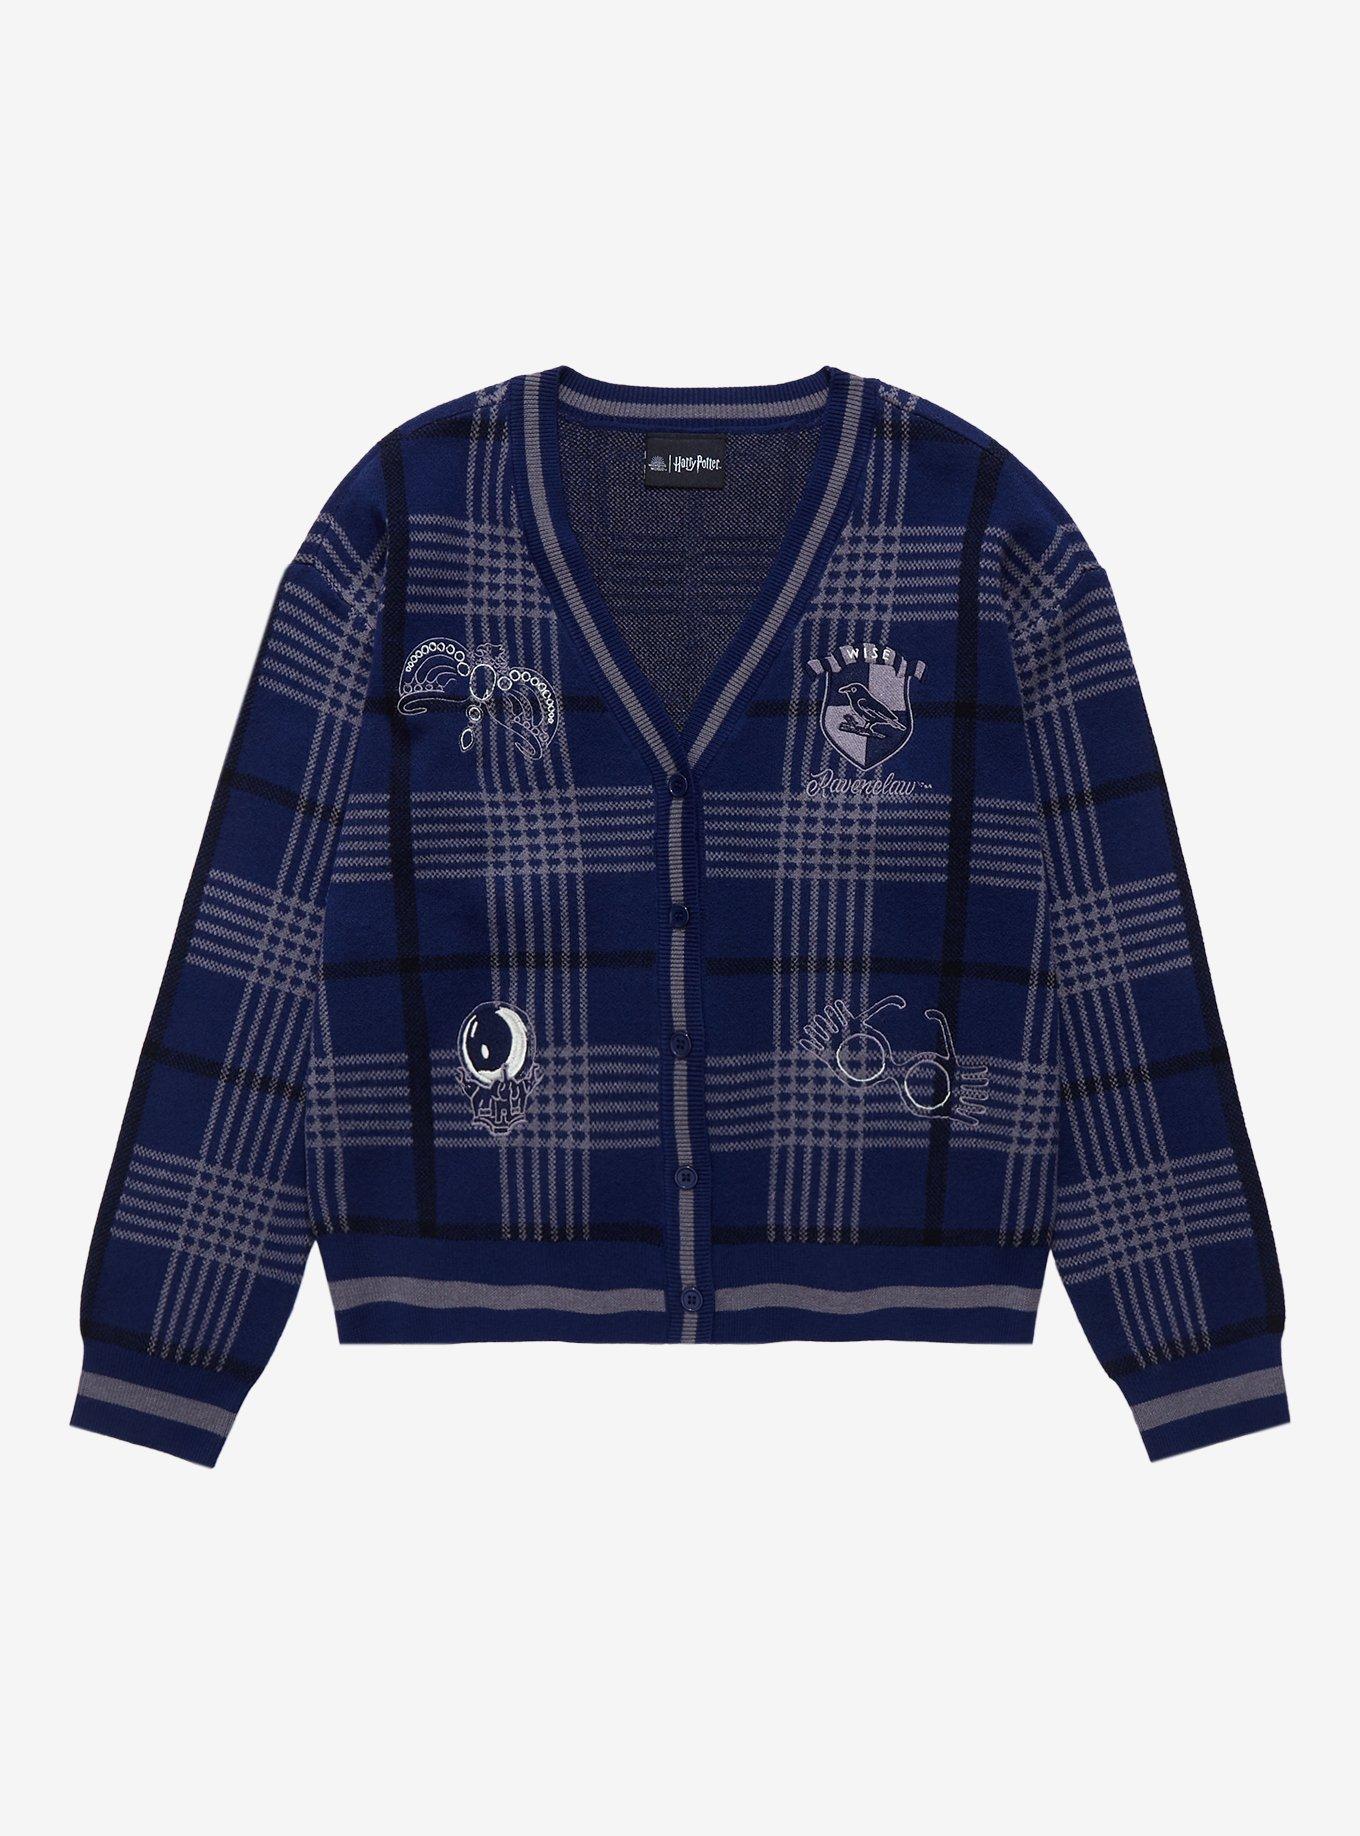 Harry Potter Ravenclaw Cardigan - BoxLunch Exclusive | BoxLunch